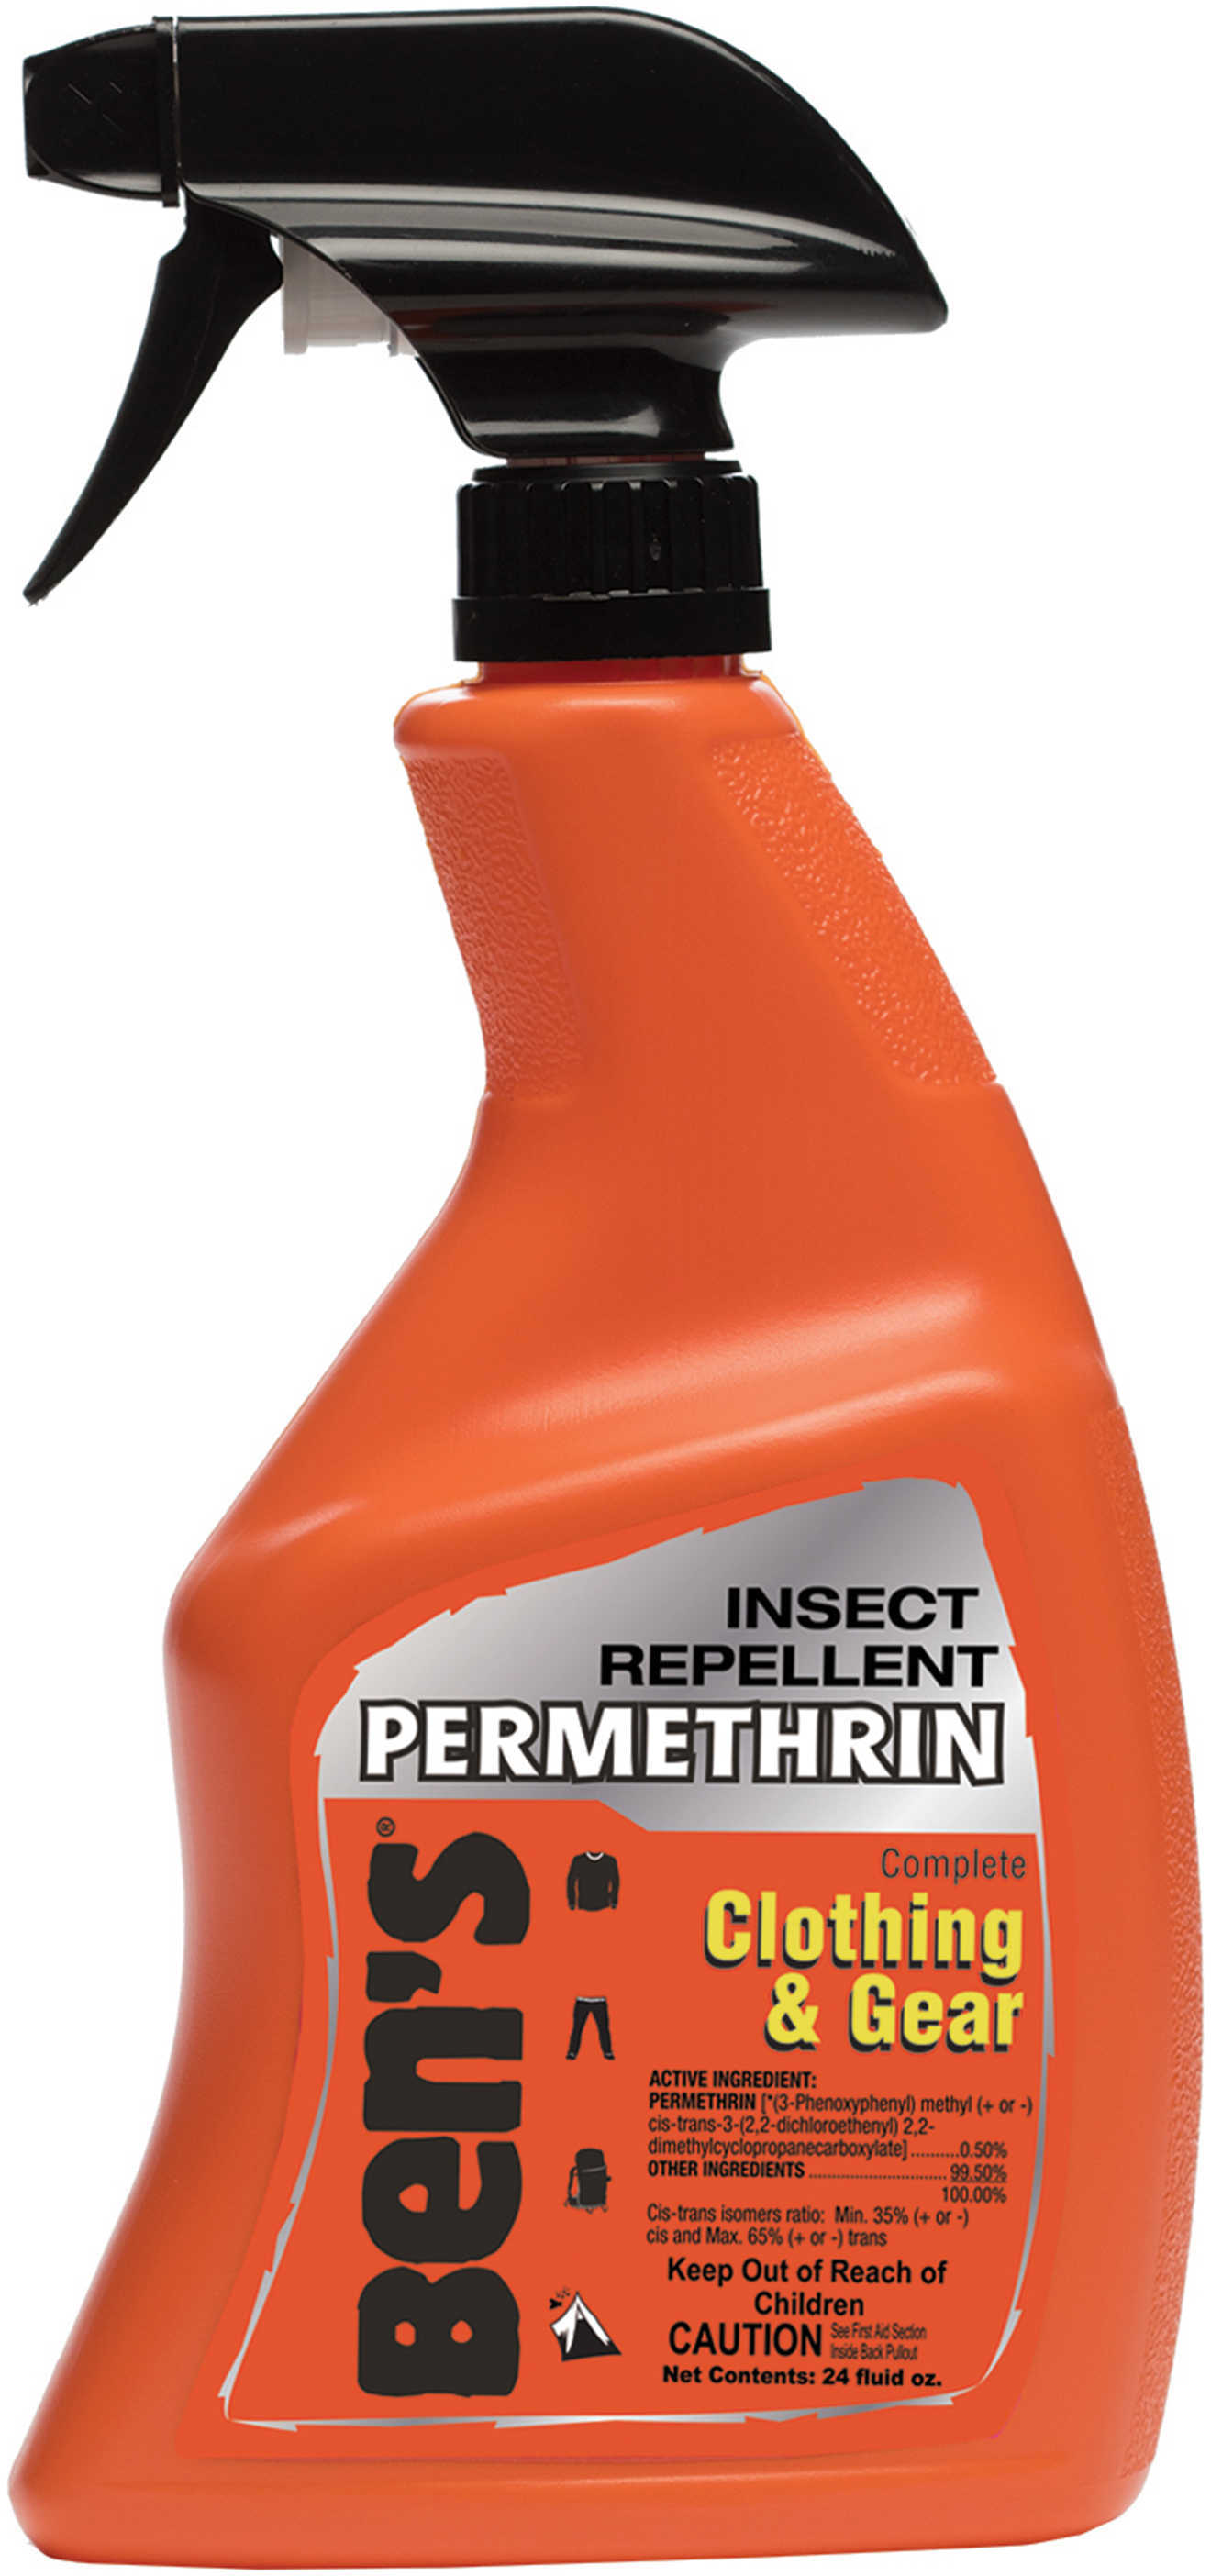 Ben's 00067601 Clothing & Gear Insect Repellent 24 Oz Spray